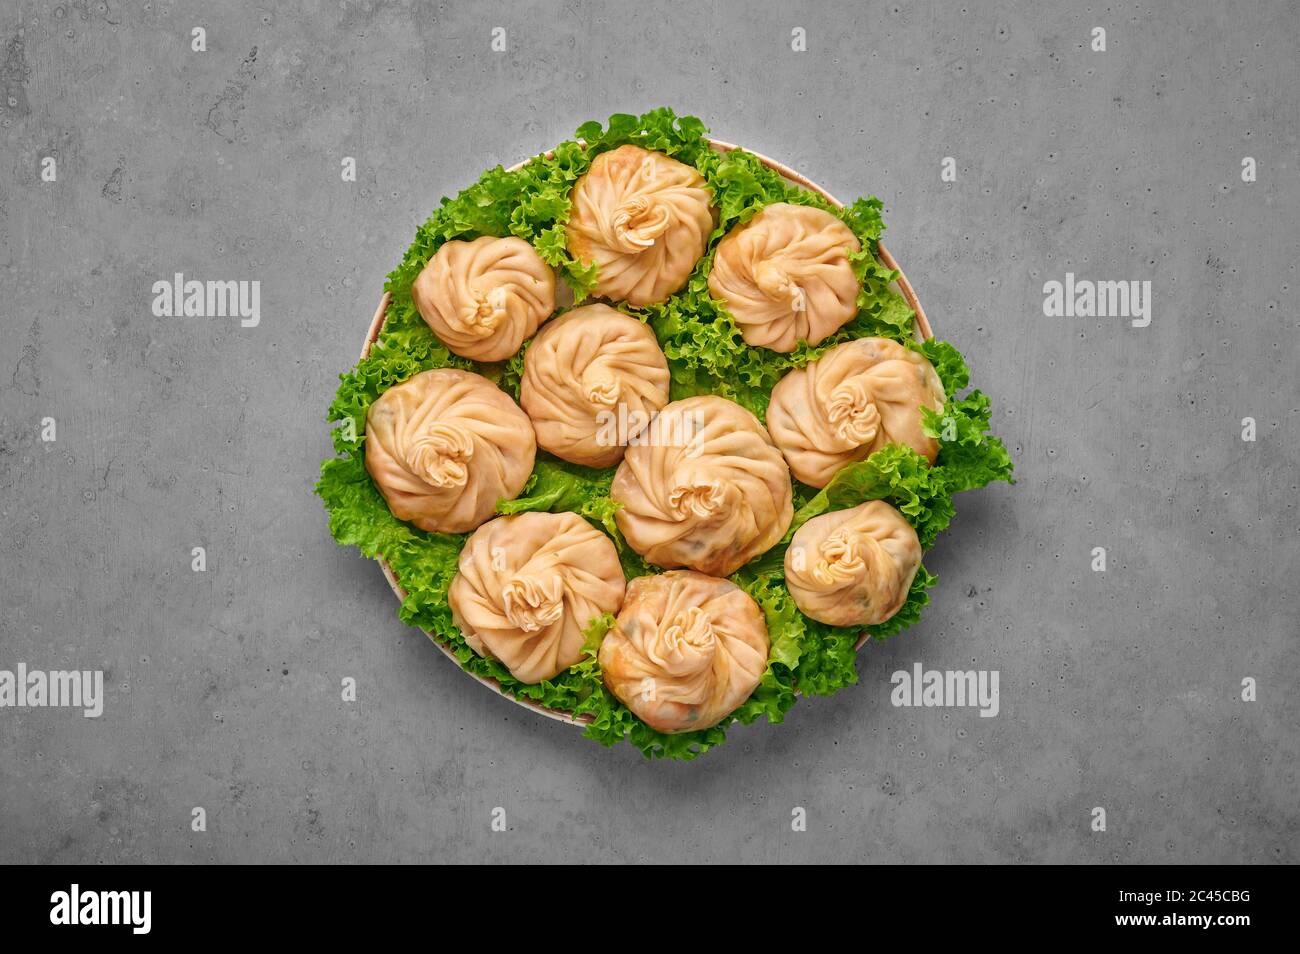 Veg Momos on gray concrete table top . Momos is the popular dish of indian, tibetan, chinese cuisines. Asian food. Vegetarian meal. Top view Stock Photo